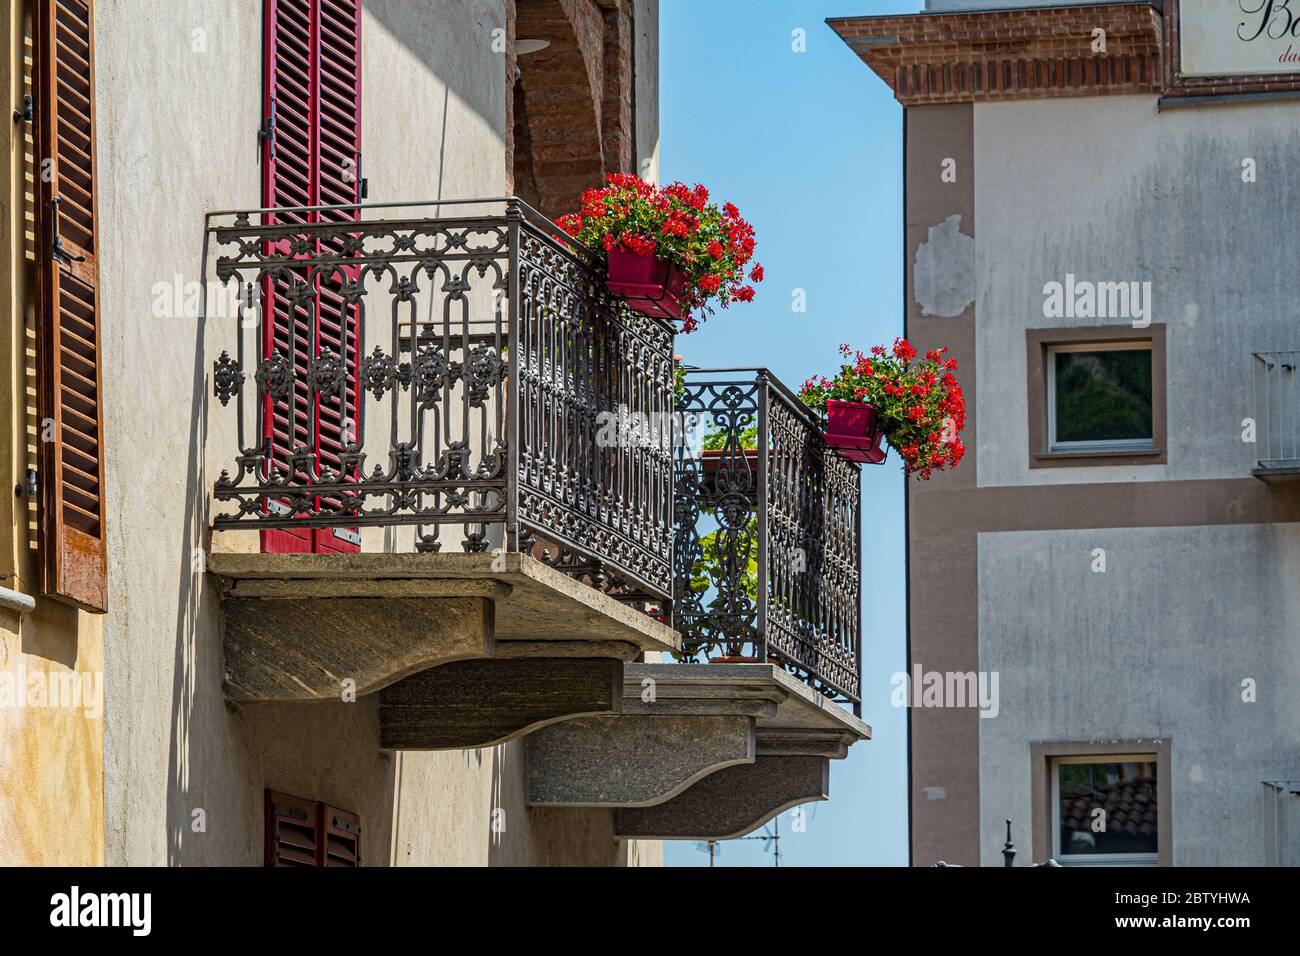 Beautiful old metal balconies with flowers at the front - City of Barolo, Italy, Piedmont Stock Photo